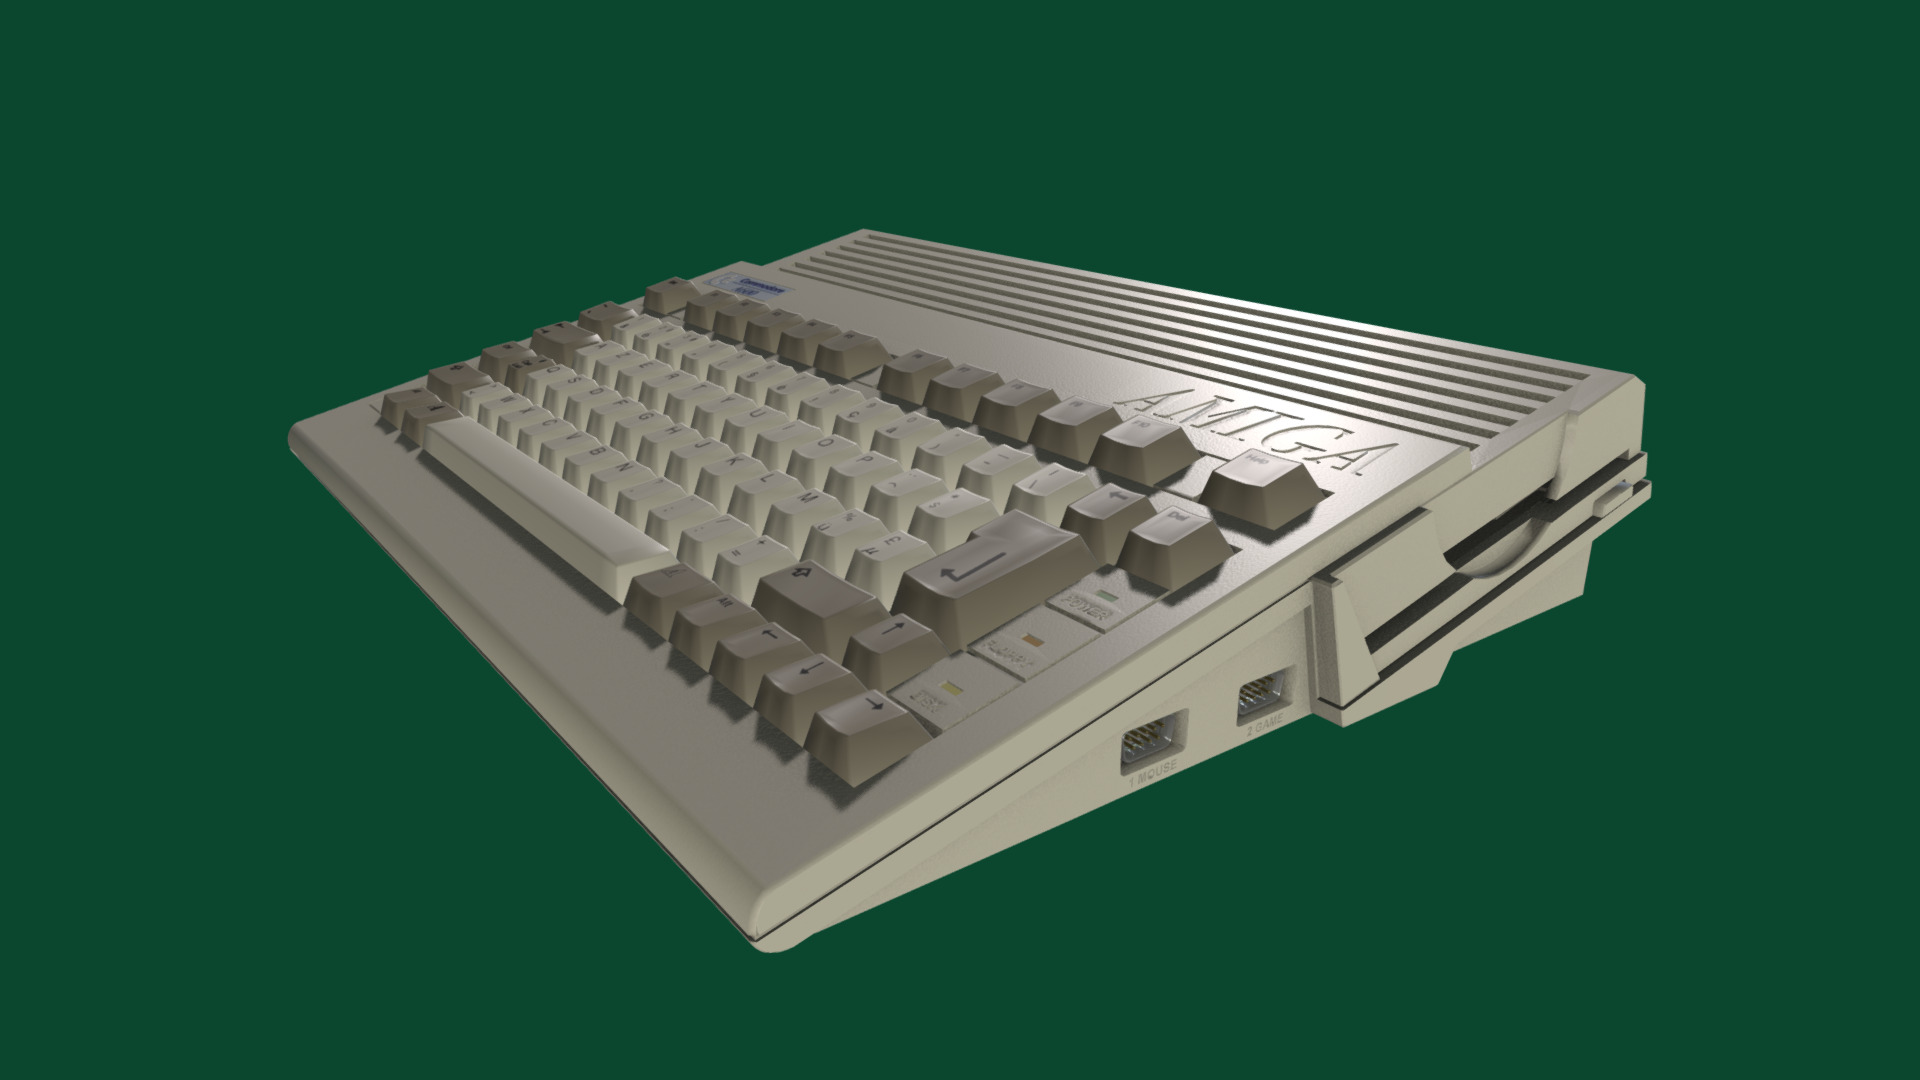 3D model Amiga 600 Commodore – PBR / highly detailed - This is a 3D model of the Amiga 600 Commodore - PBR / highly detailed. The 3D model is about a white rectangular object.